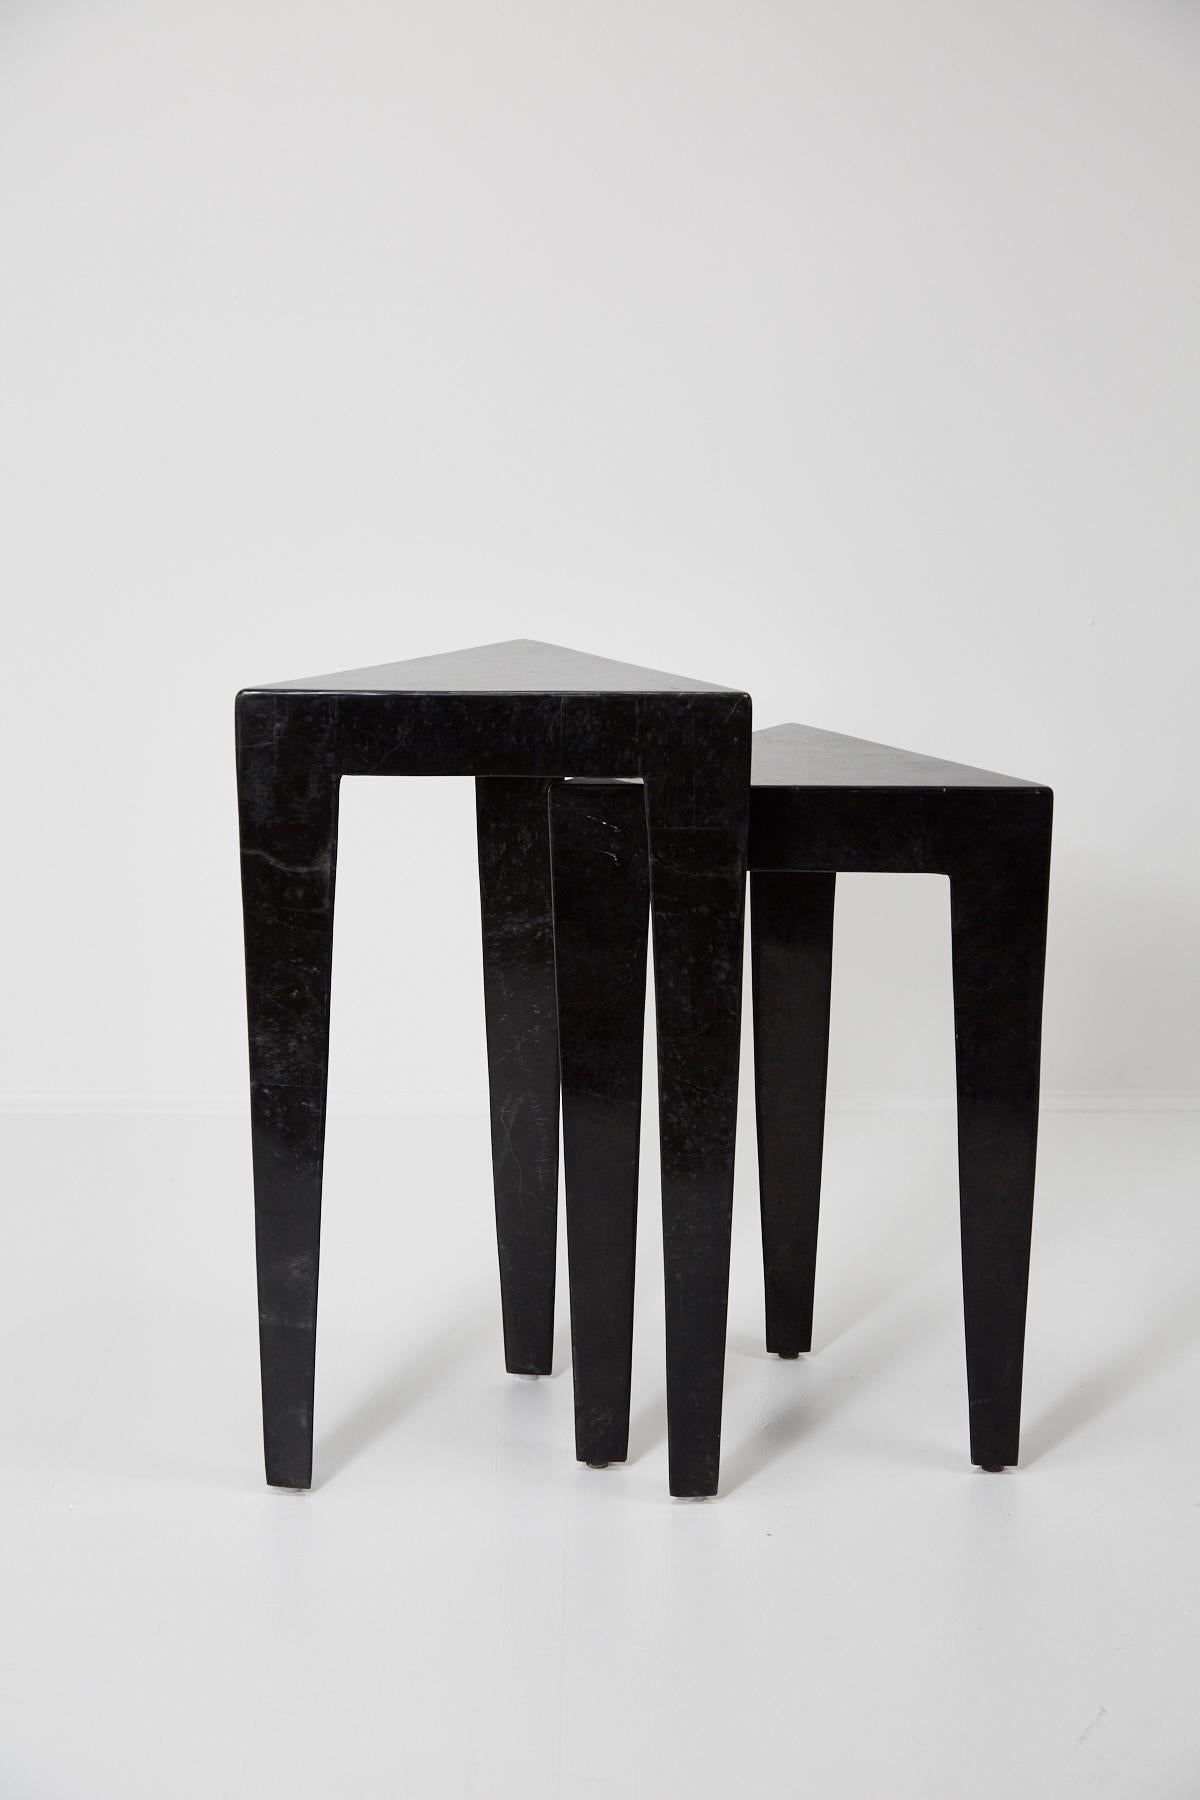 Black Tessellated Stone Triangular Nesting Tables, 1990s For Sale 3